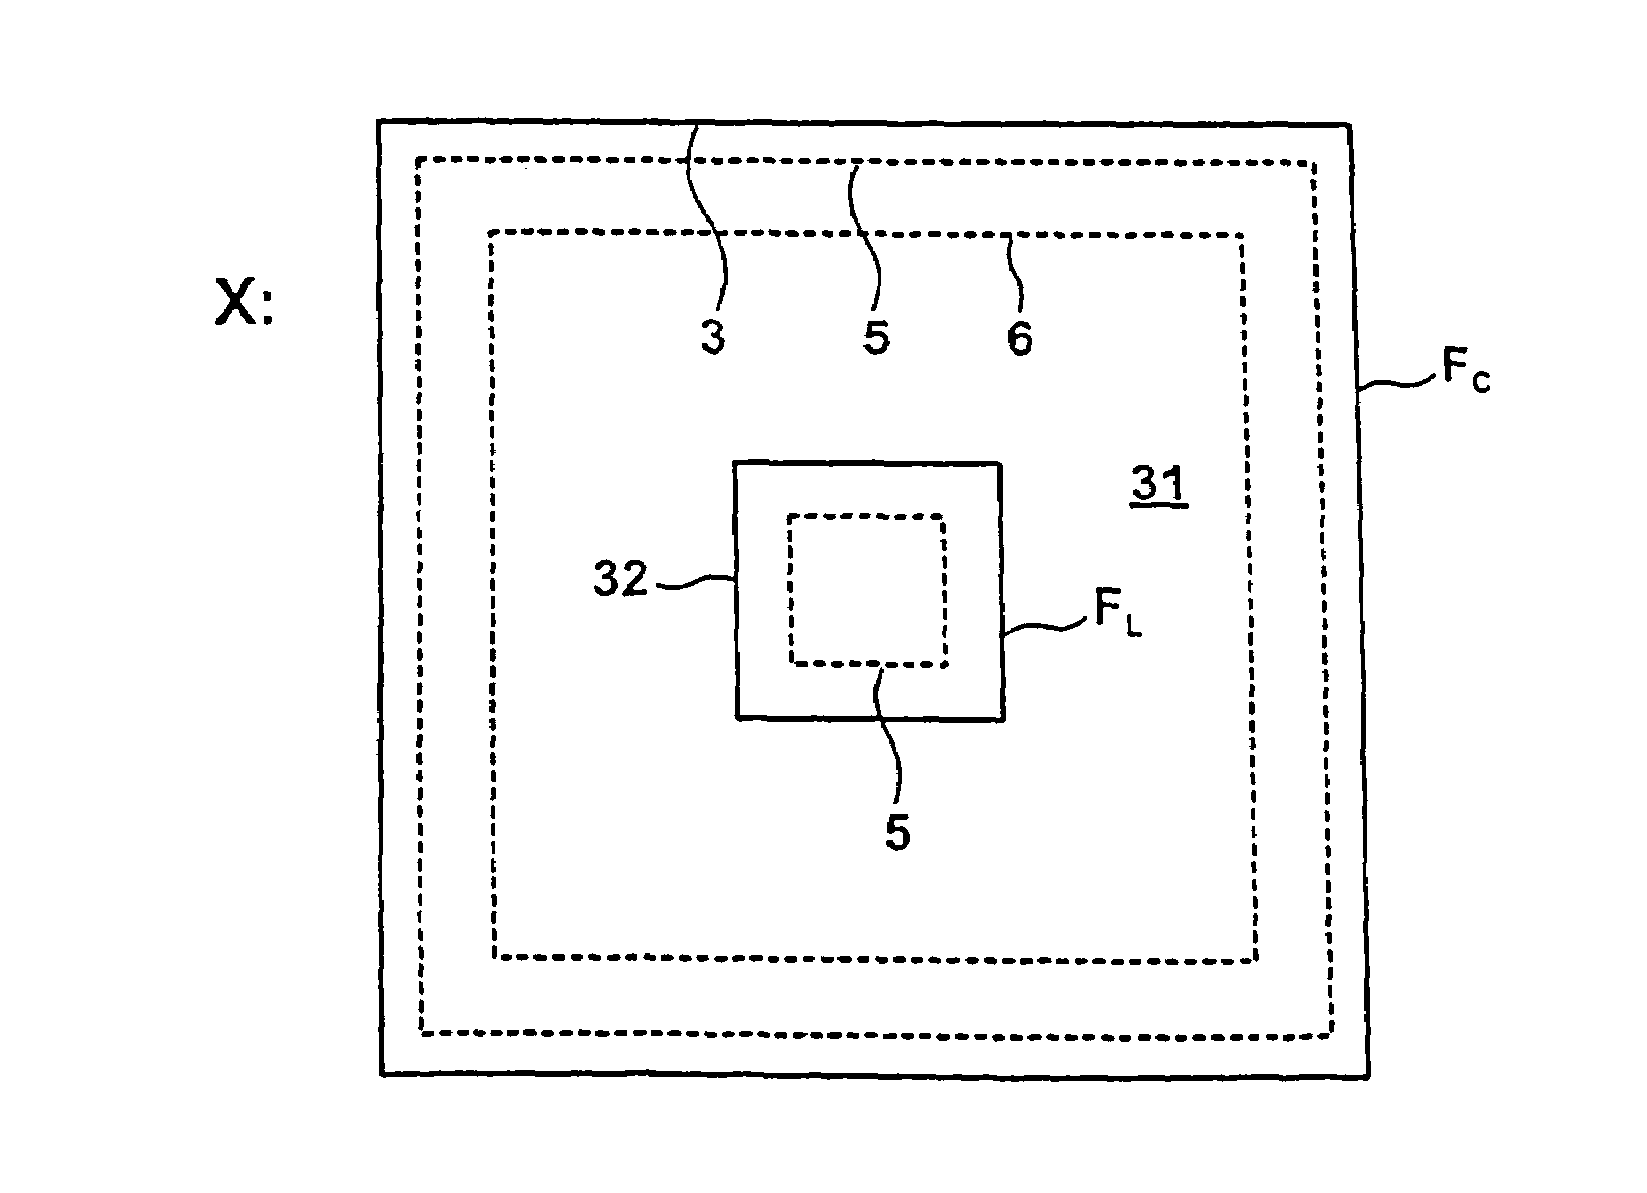 High radiance LED chip and a method for producing same